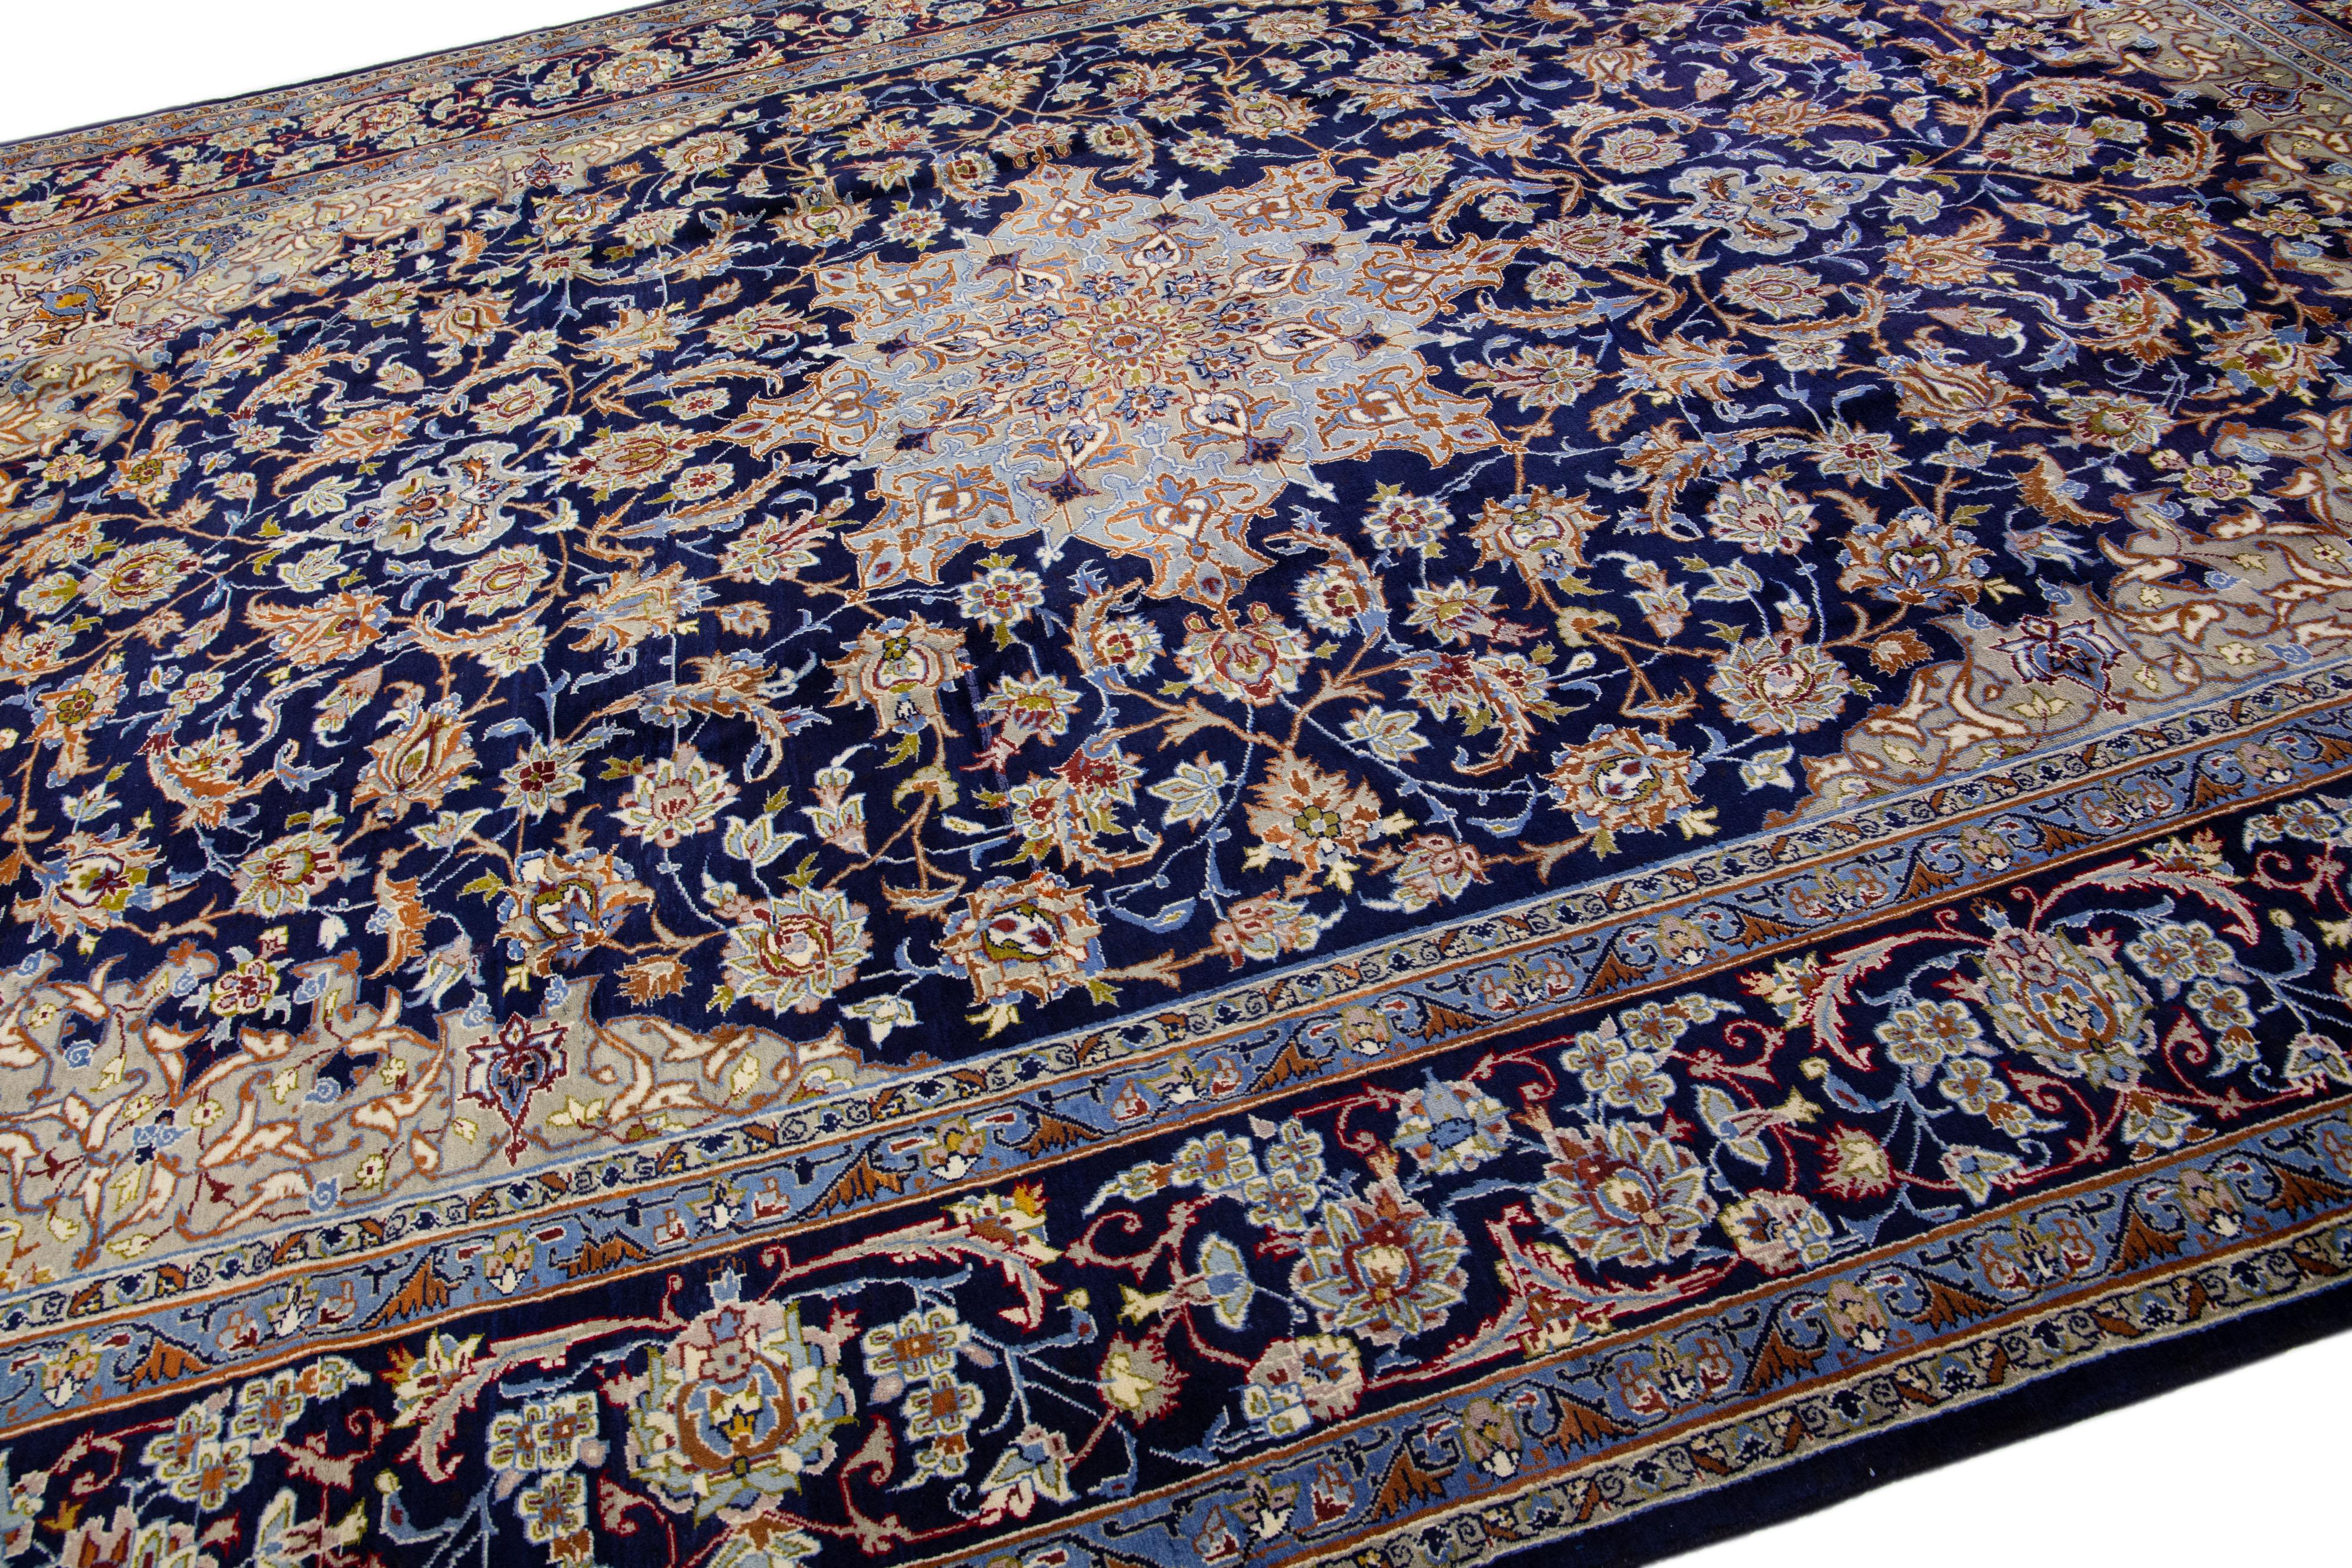 Beautiful Persian Isfahan hand-knotted natural wool rug with a navy blue color field. This piece has a designed frame with rust, beige, and light blue accents in an all-over medallion floral design.

This rug measures: 11'2